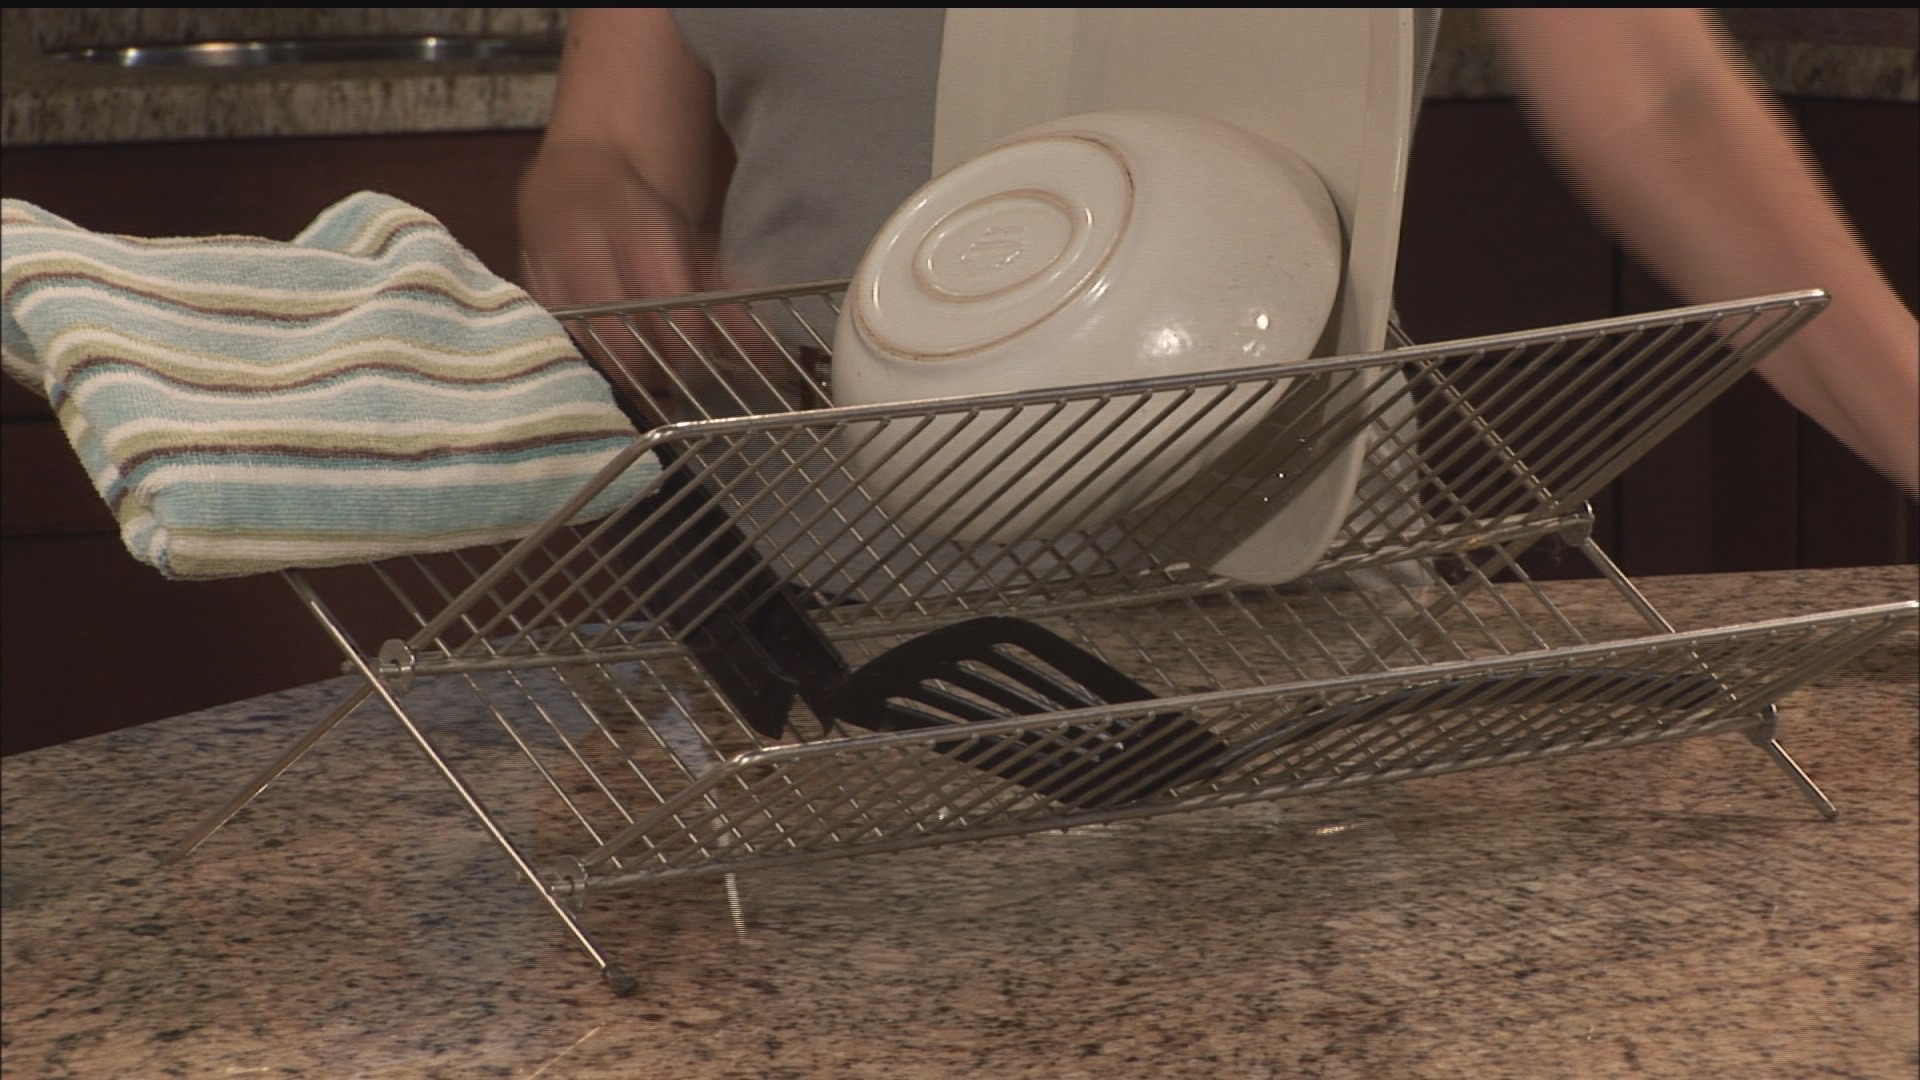 Why Air Drying Is The Safest Way To Dry Dishes - No Kidding!